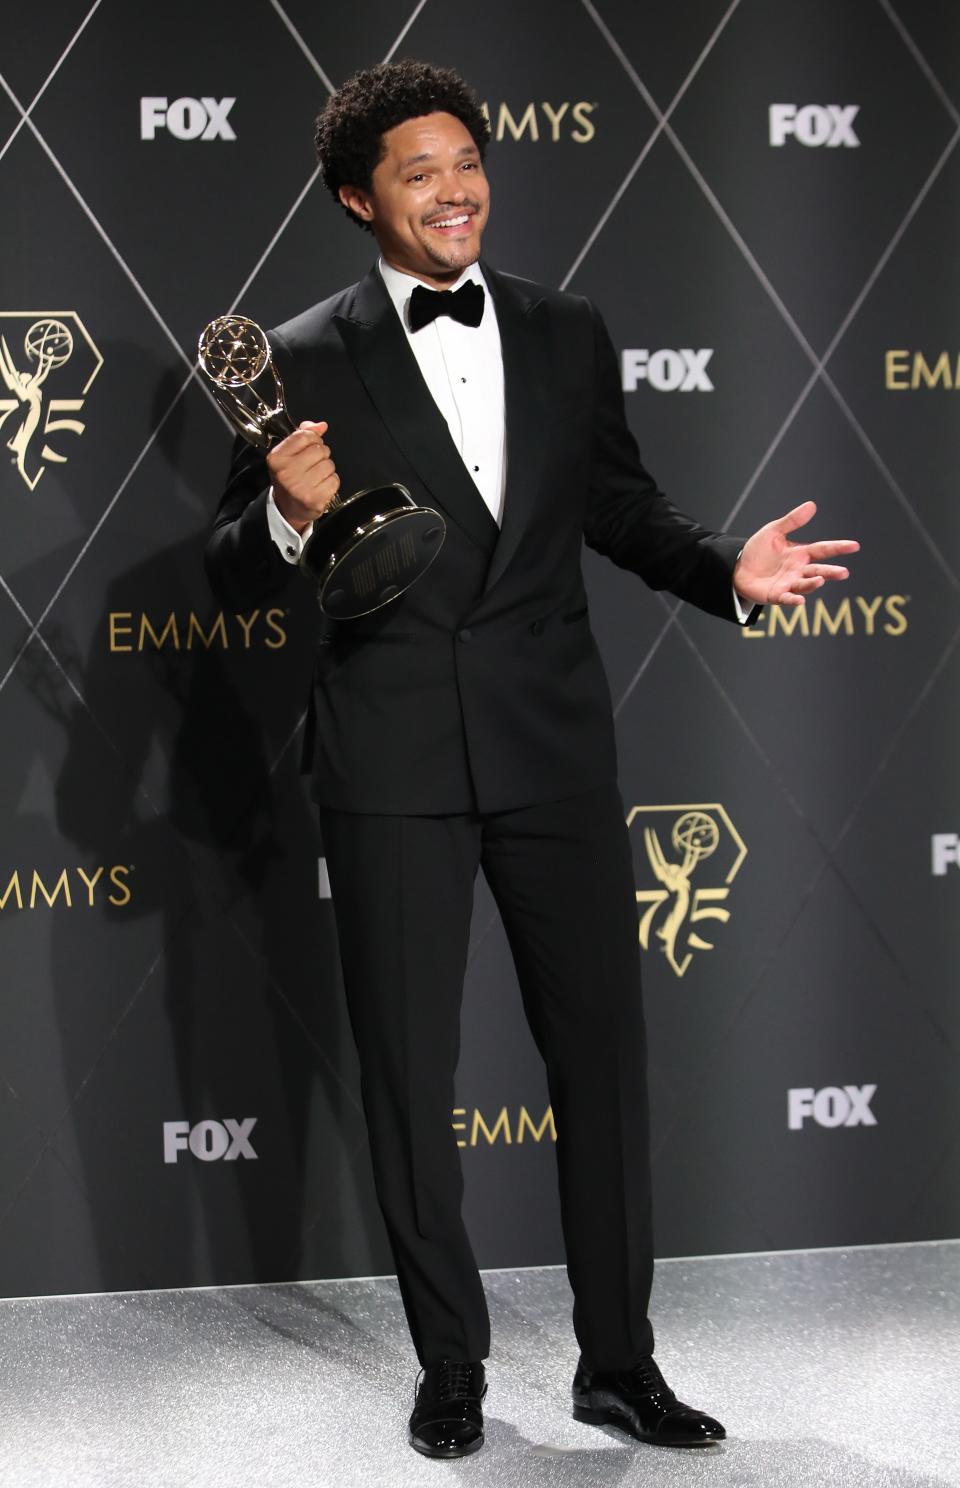 Trevor Noah, winner of Outstanding Talk Series for "The Daily Show With Trevor Noah," at the 75th Emmy Awards at the Peacock Theater in Los Angeles on Monday.